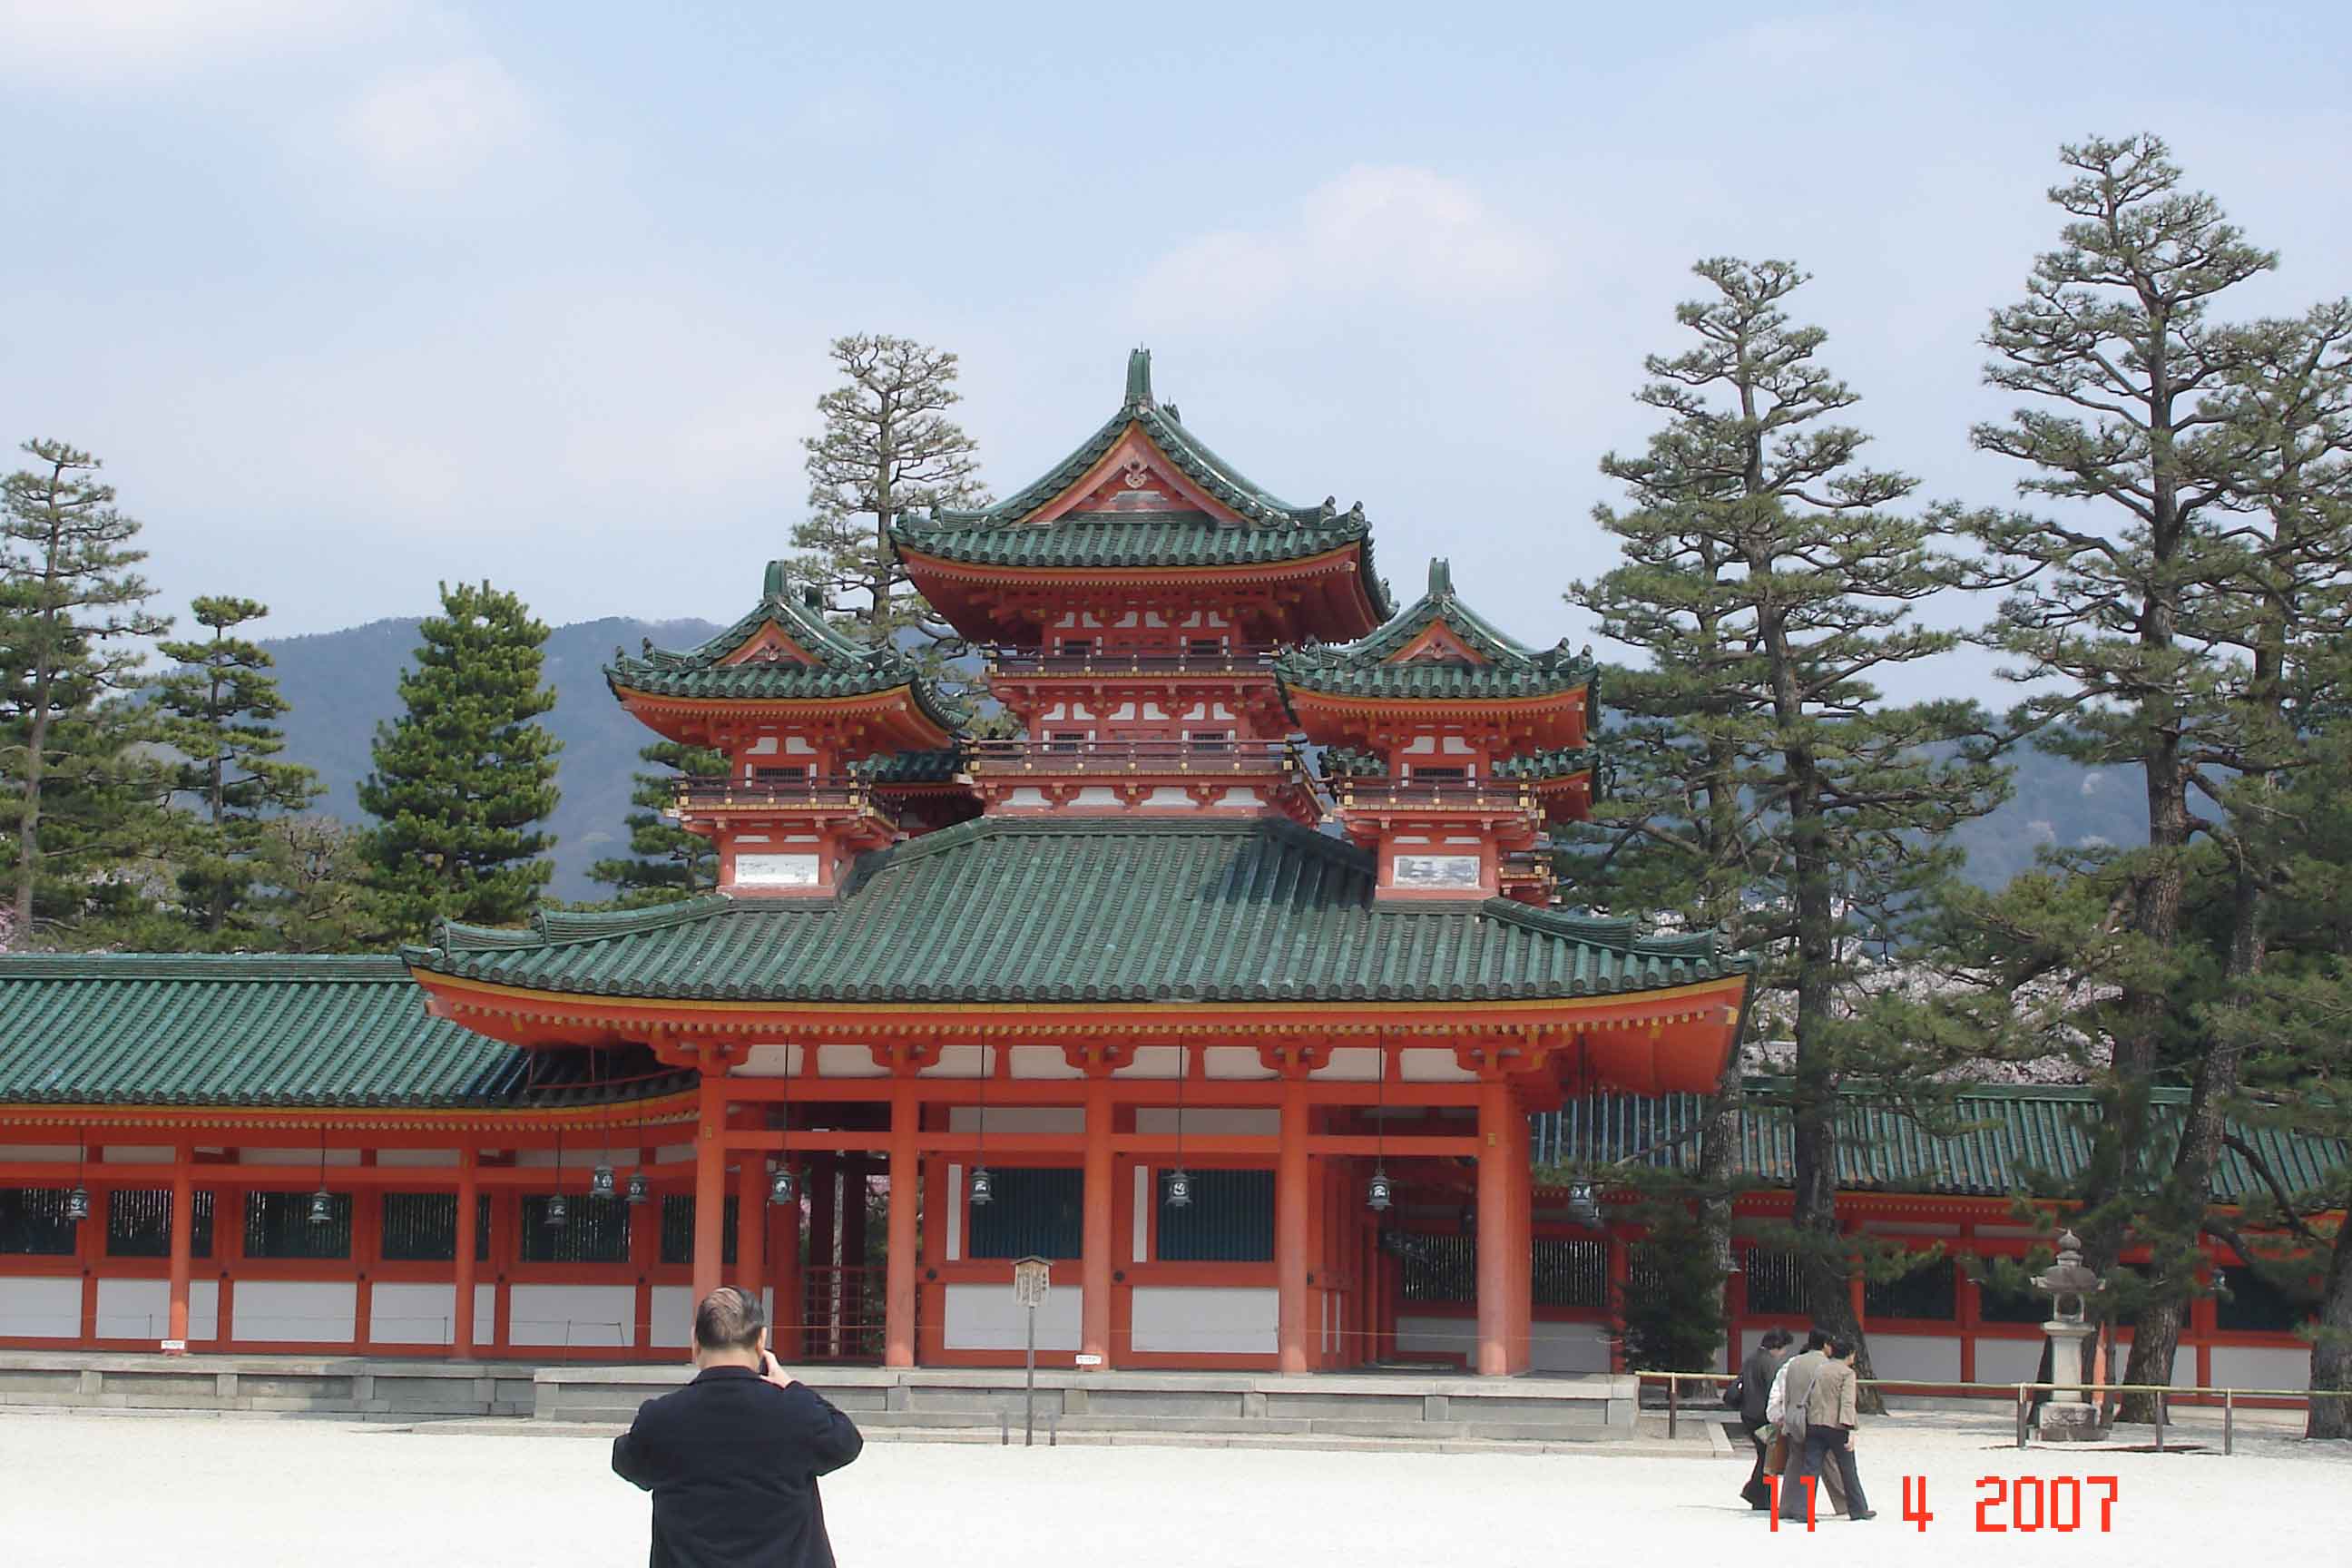 Heian Palace (replica of the old Kyoto Imperial Palace only on a smaller scale)